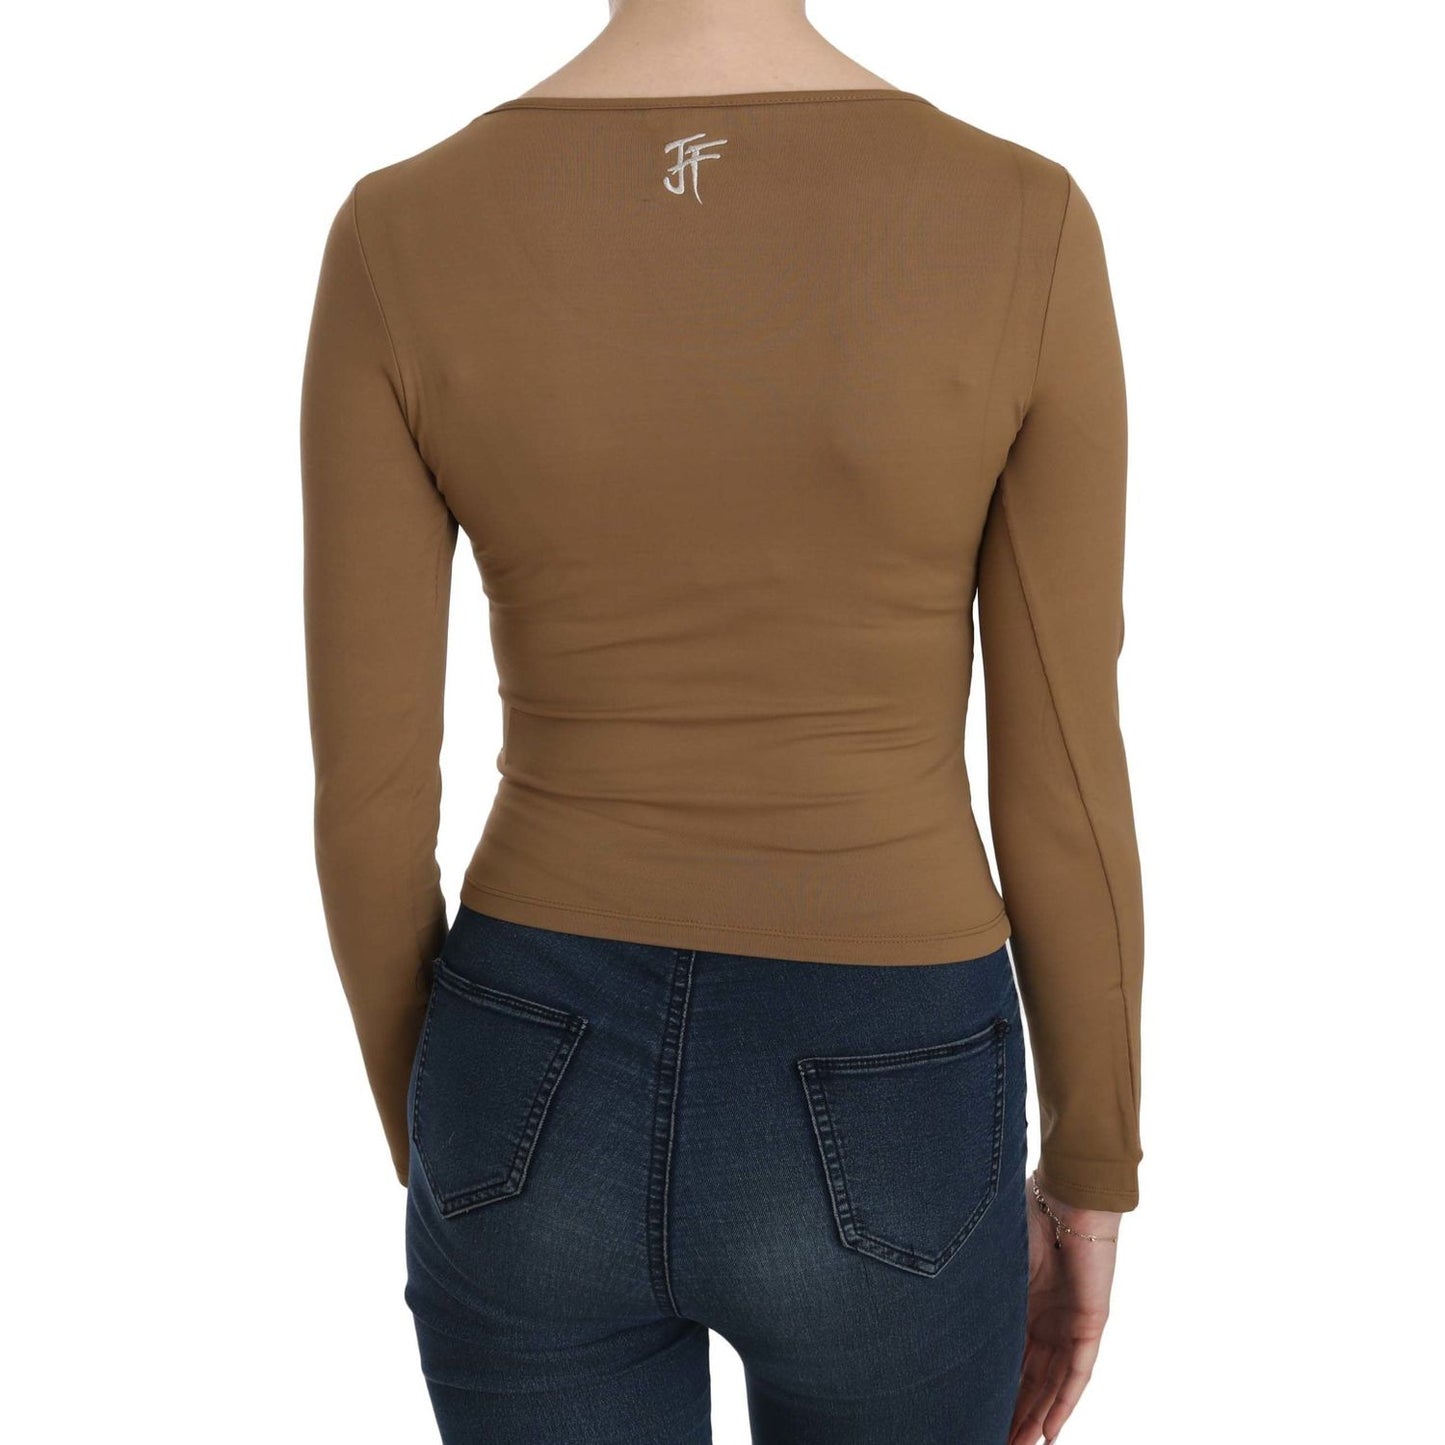 GF Ferre | Brown Long Round Neck Sleeve Fitted Shirt Tops Blouse | McRichard Designer Brands